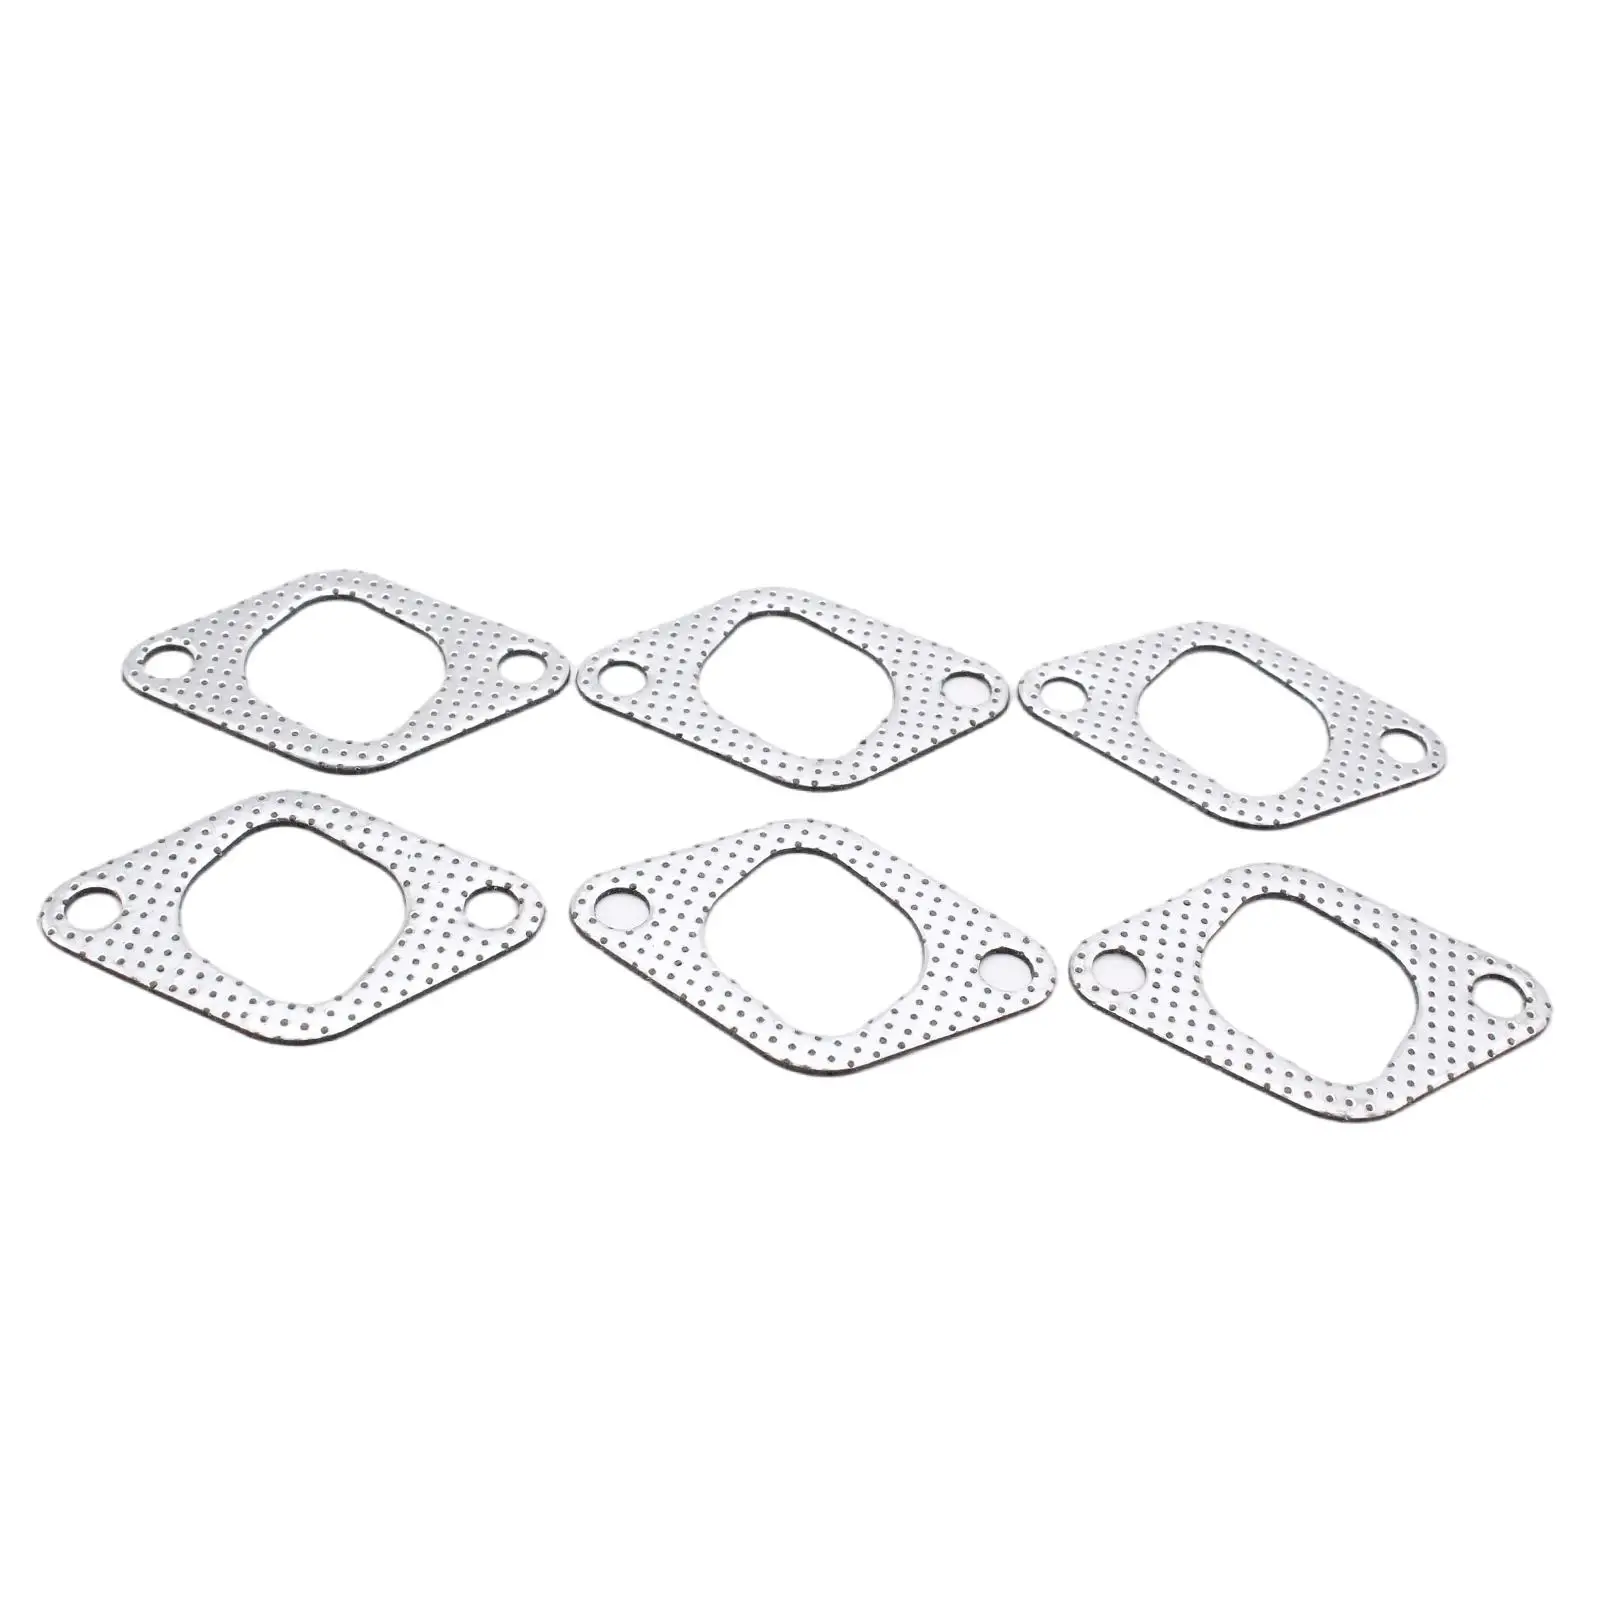 Extractor/Exhaust Manifold Gasket Set Replace for GQ Gu Patrol